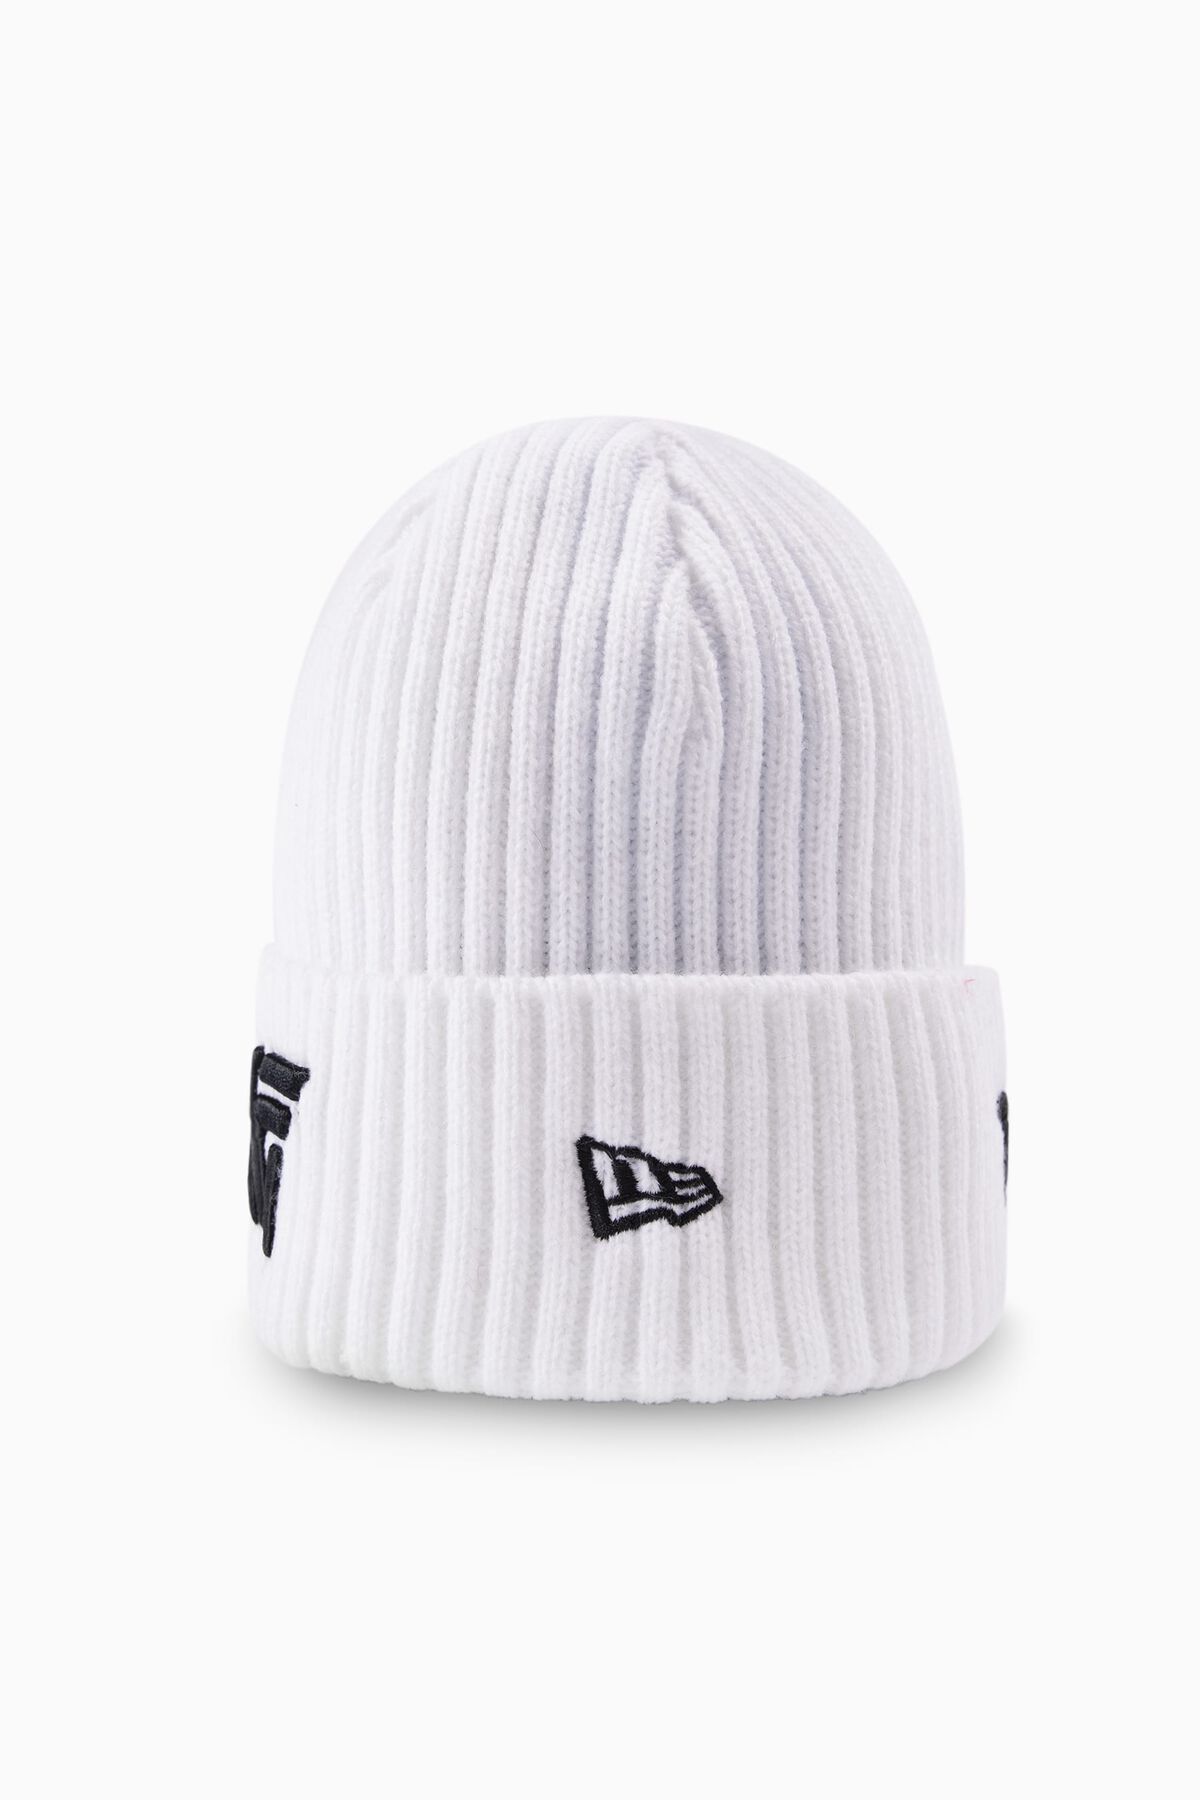 Gear, Classic Golf Golf the Clubs Apparel, Beanie and | Cuff Knit at Quality Accessories Highest PXG Shop